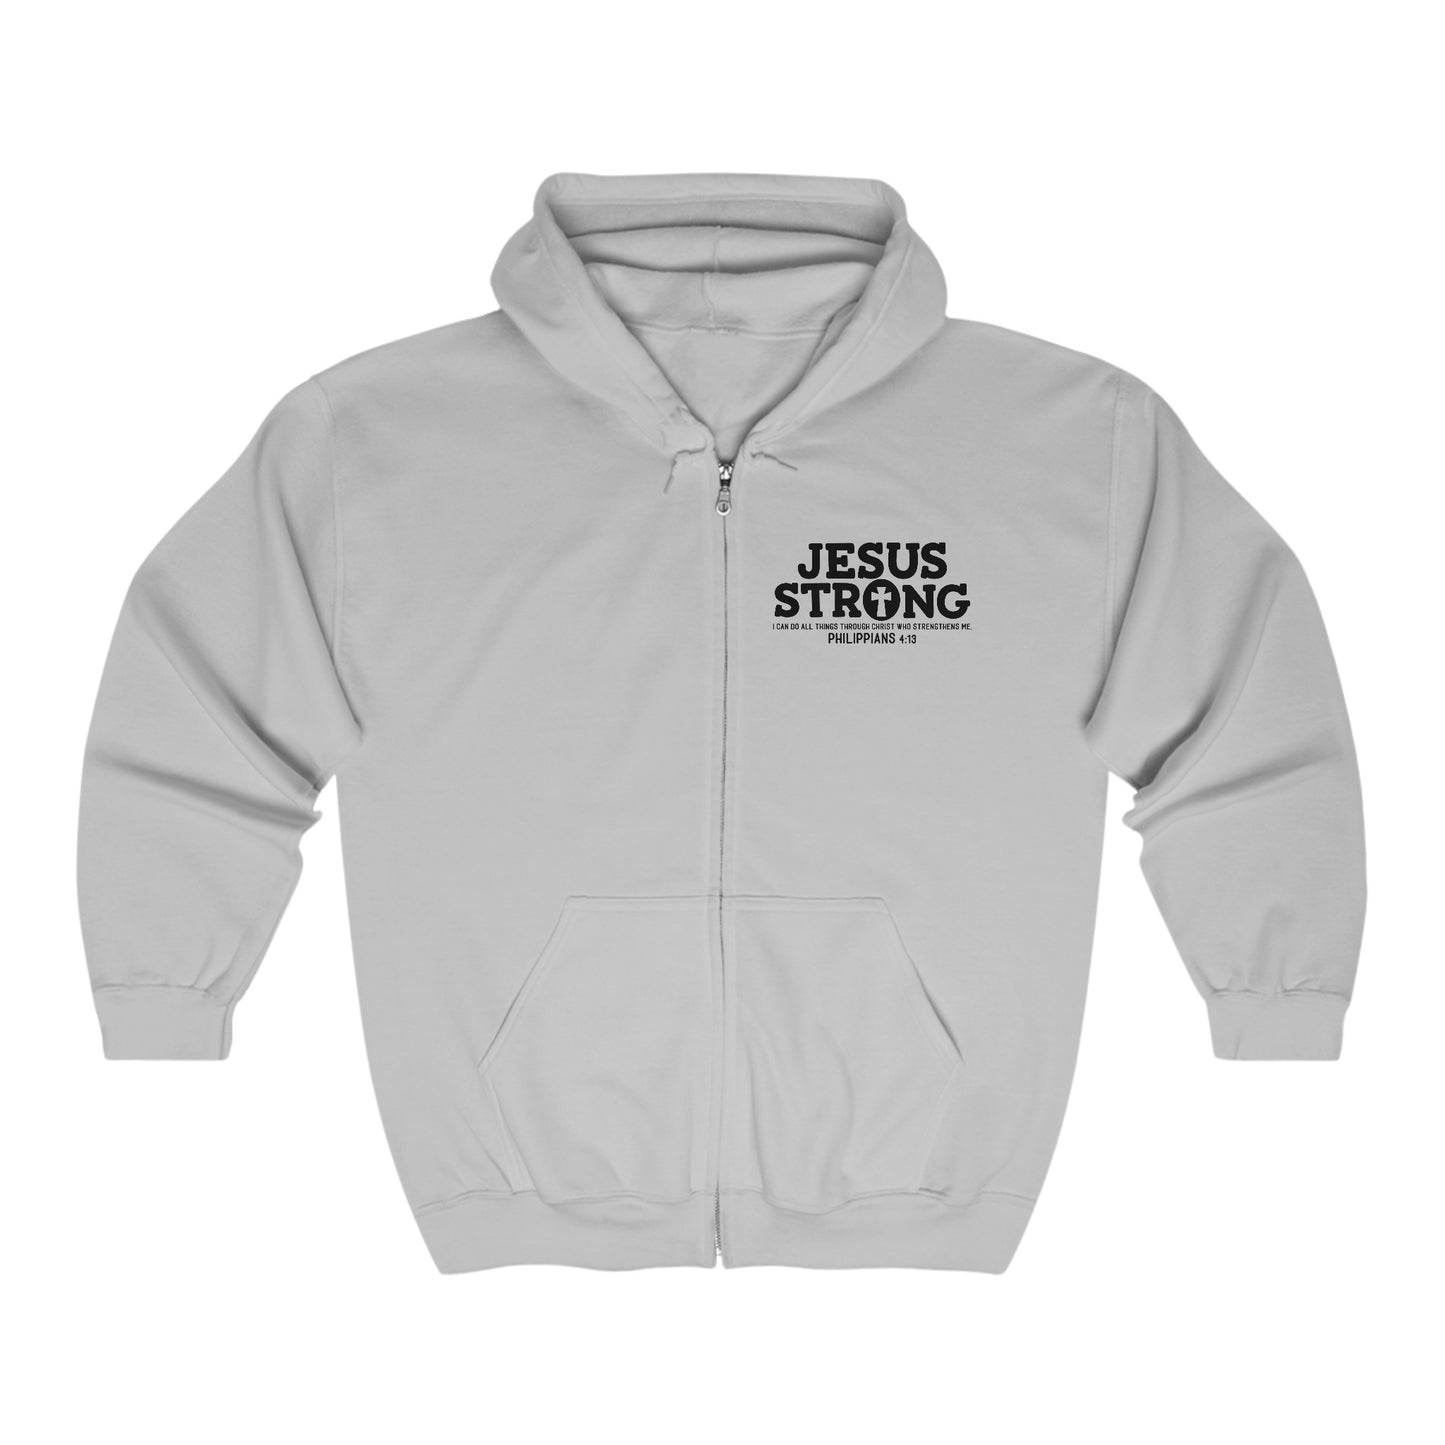 Jesus Strong I Can Do All Things Unisex Heavy Blend Full Zip Hooded Sweatshirt